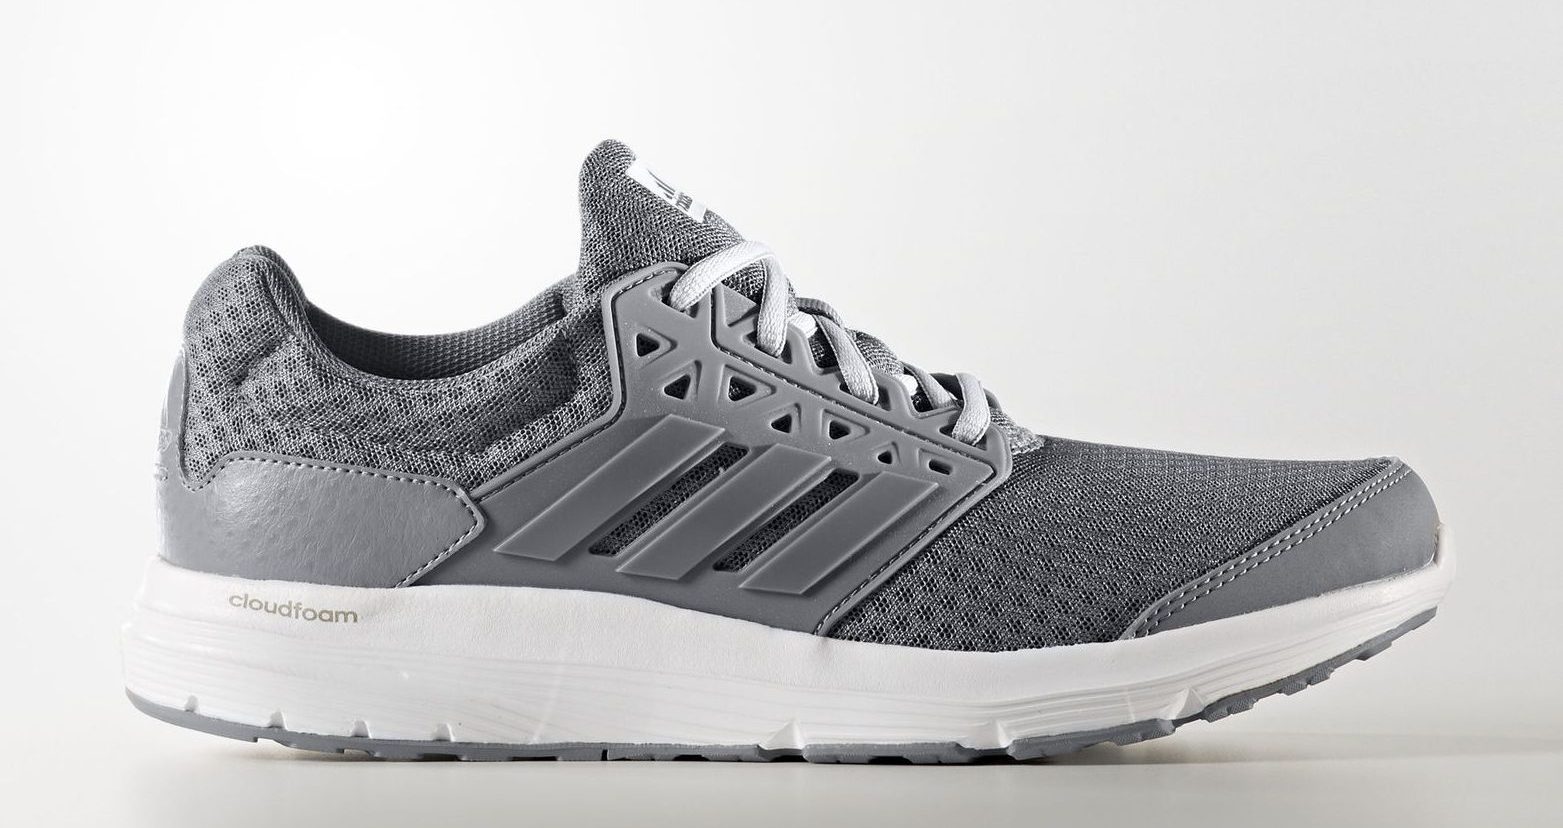 Adidas Galaxy 3 men’s running shoes for $36 shipped